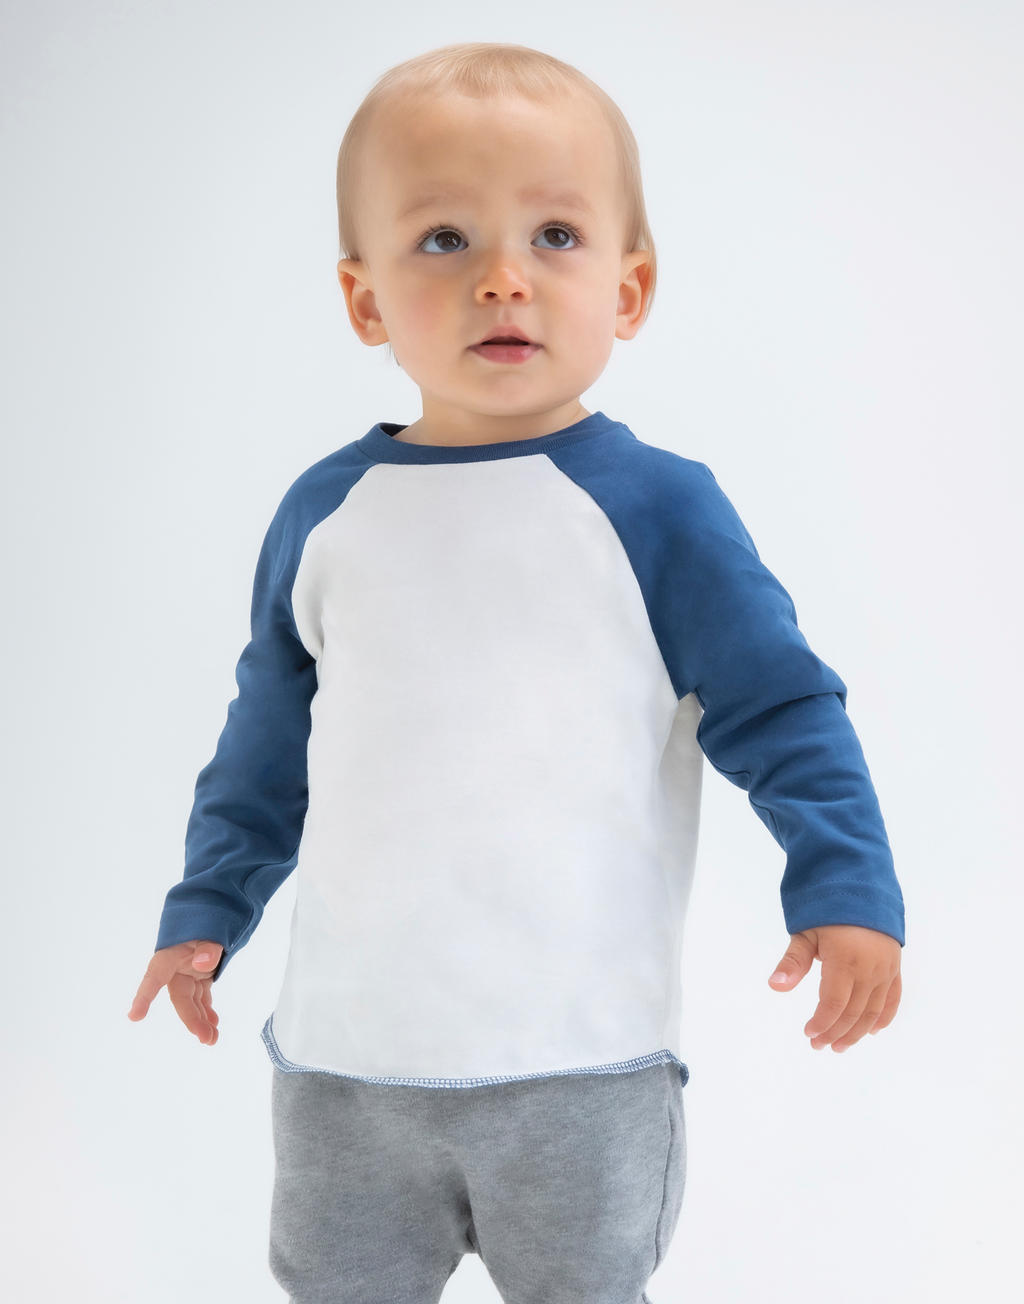  Baby Superstar Baseball T in Farbe Washed White/Swiss Navy